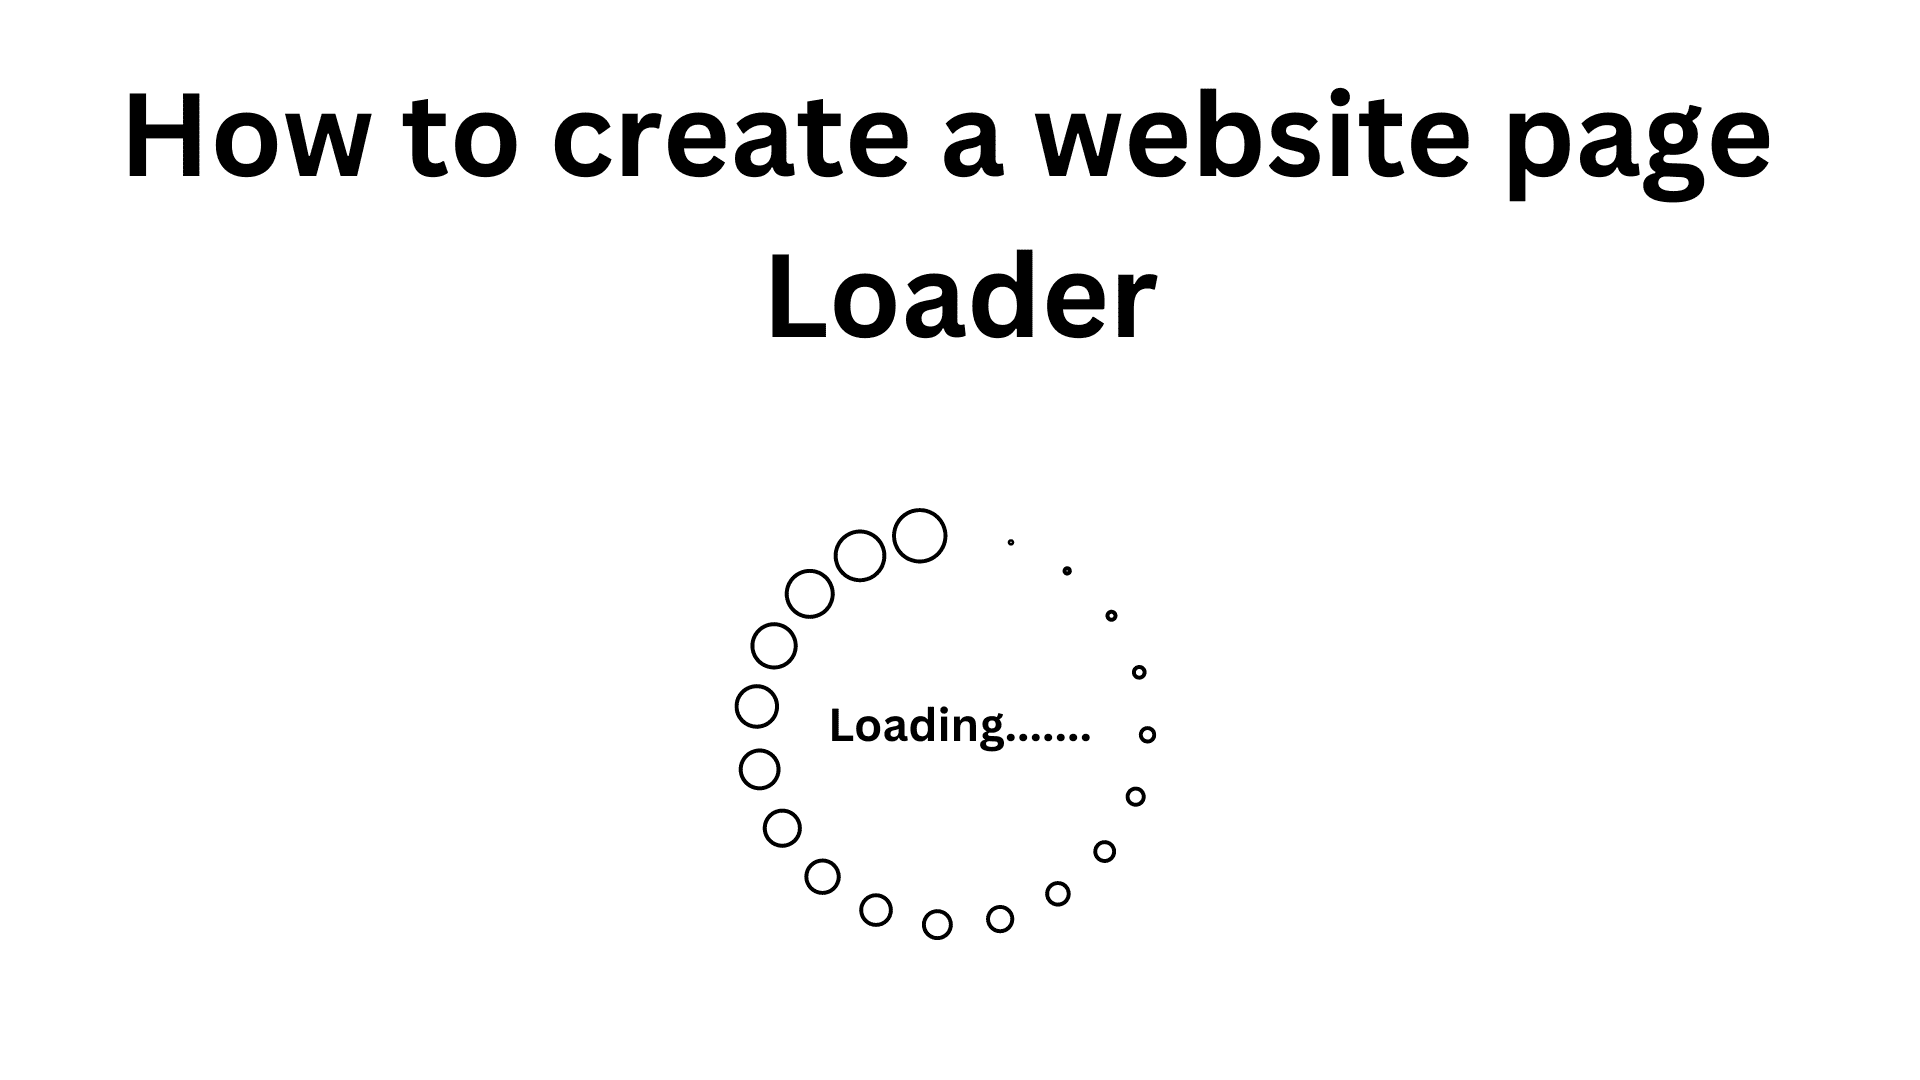 How to create working website page loader details